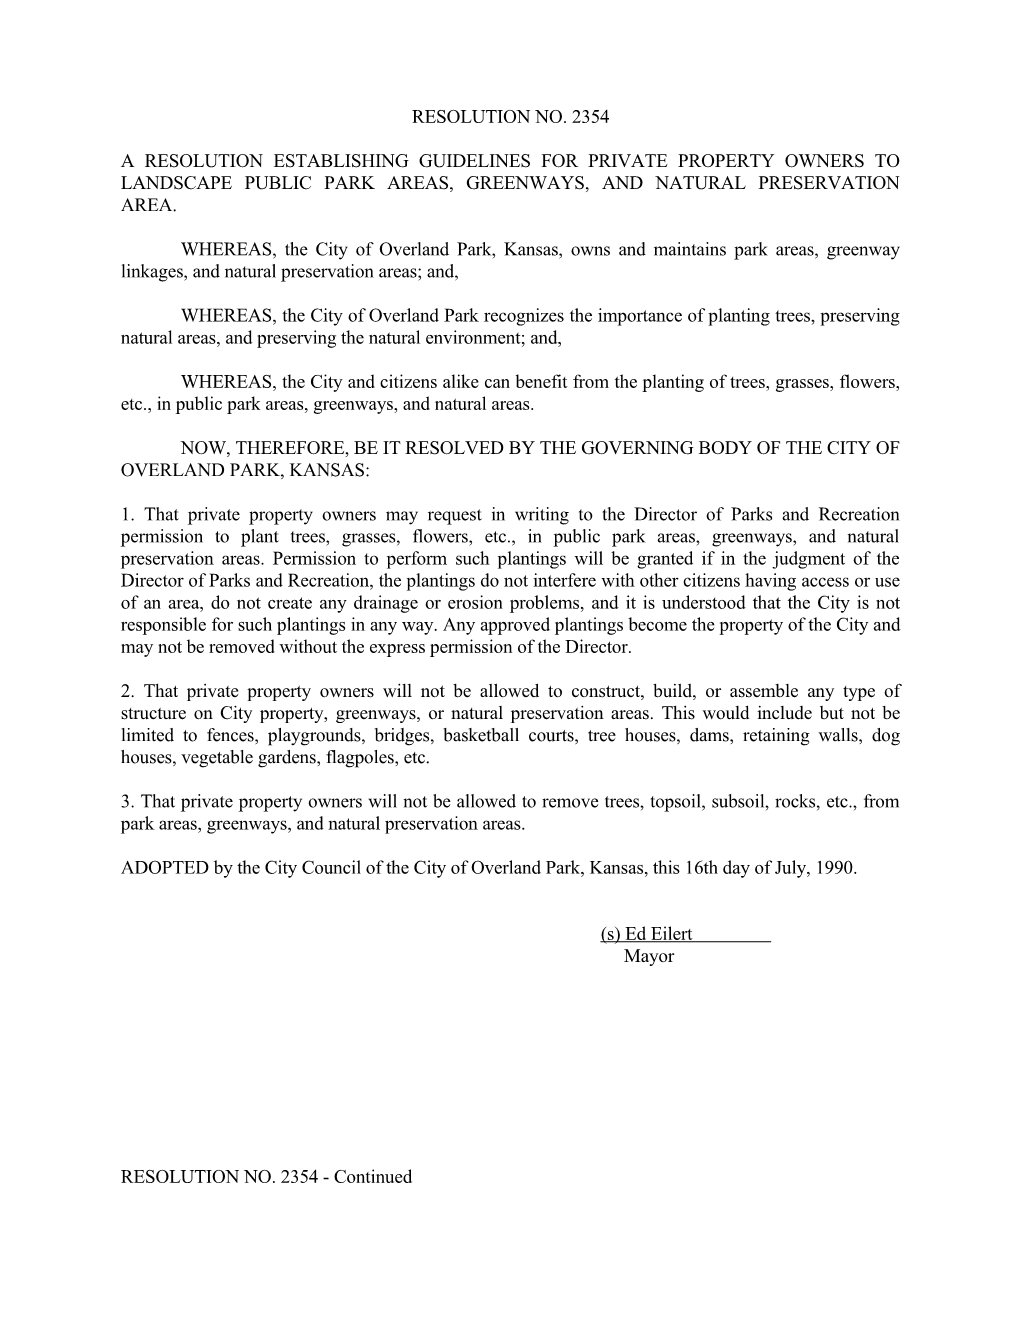 Parks, Landscaping by Private Property Owners - Resolution No. 2354 - July 17, 1990